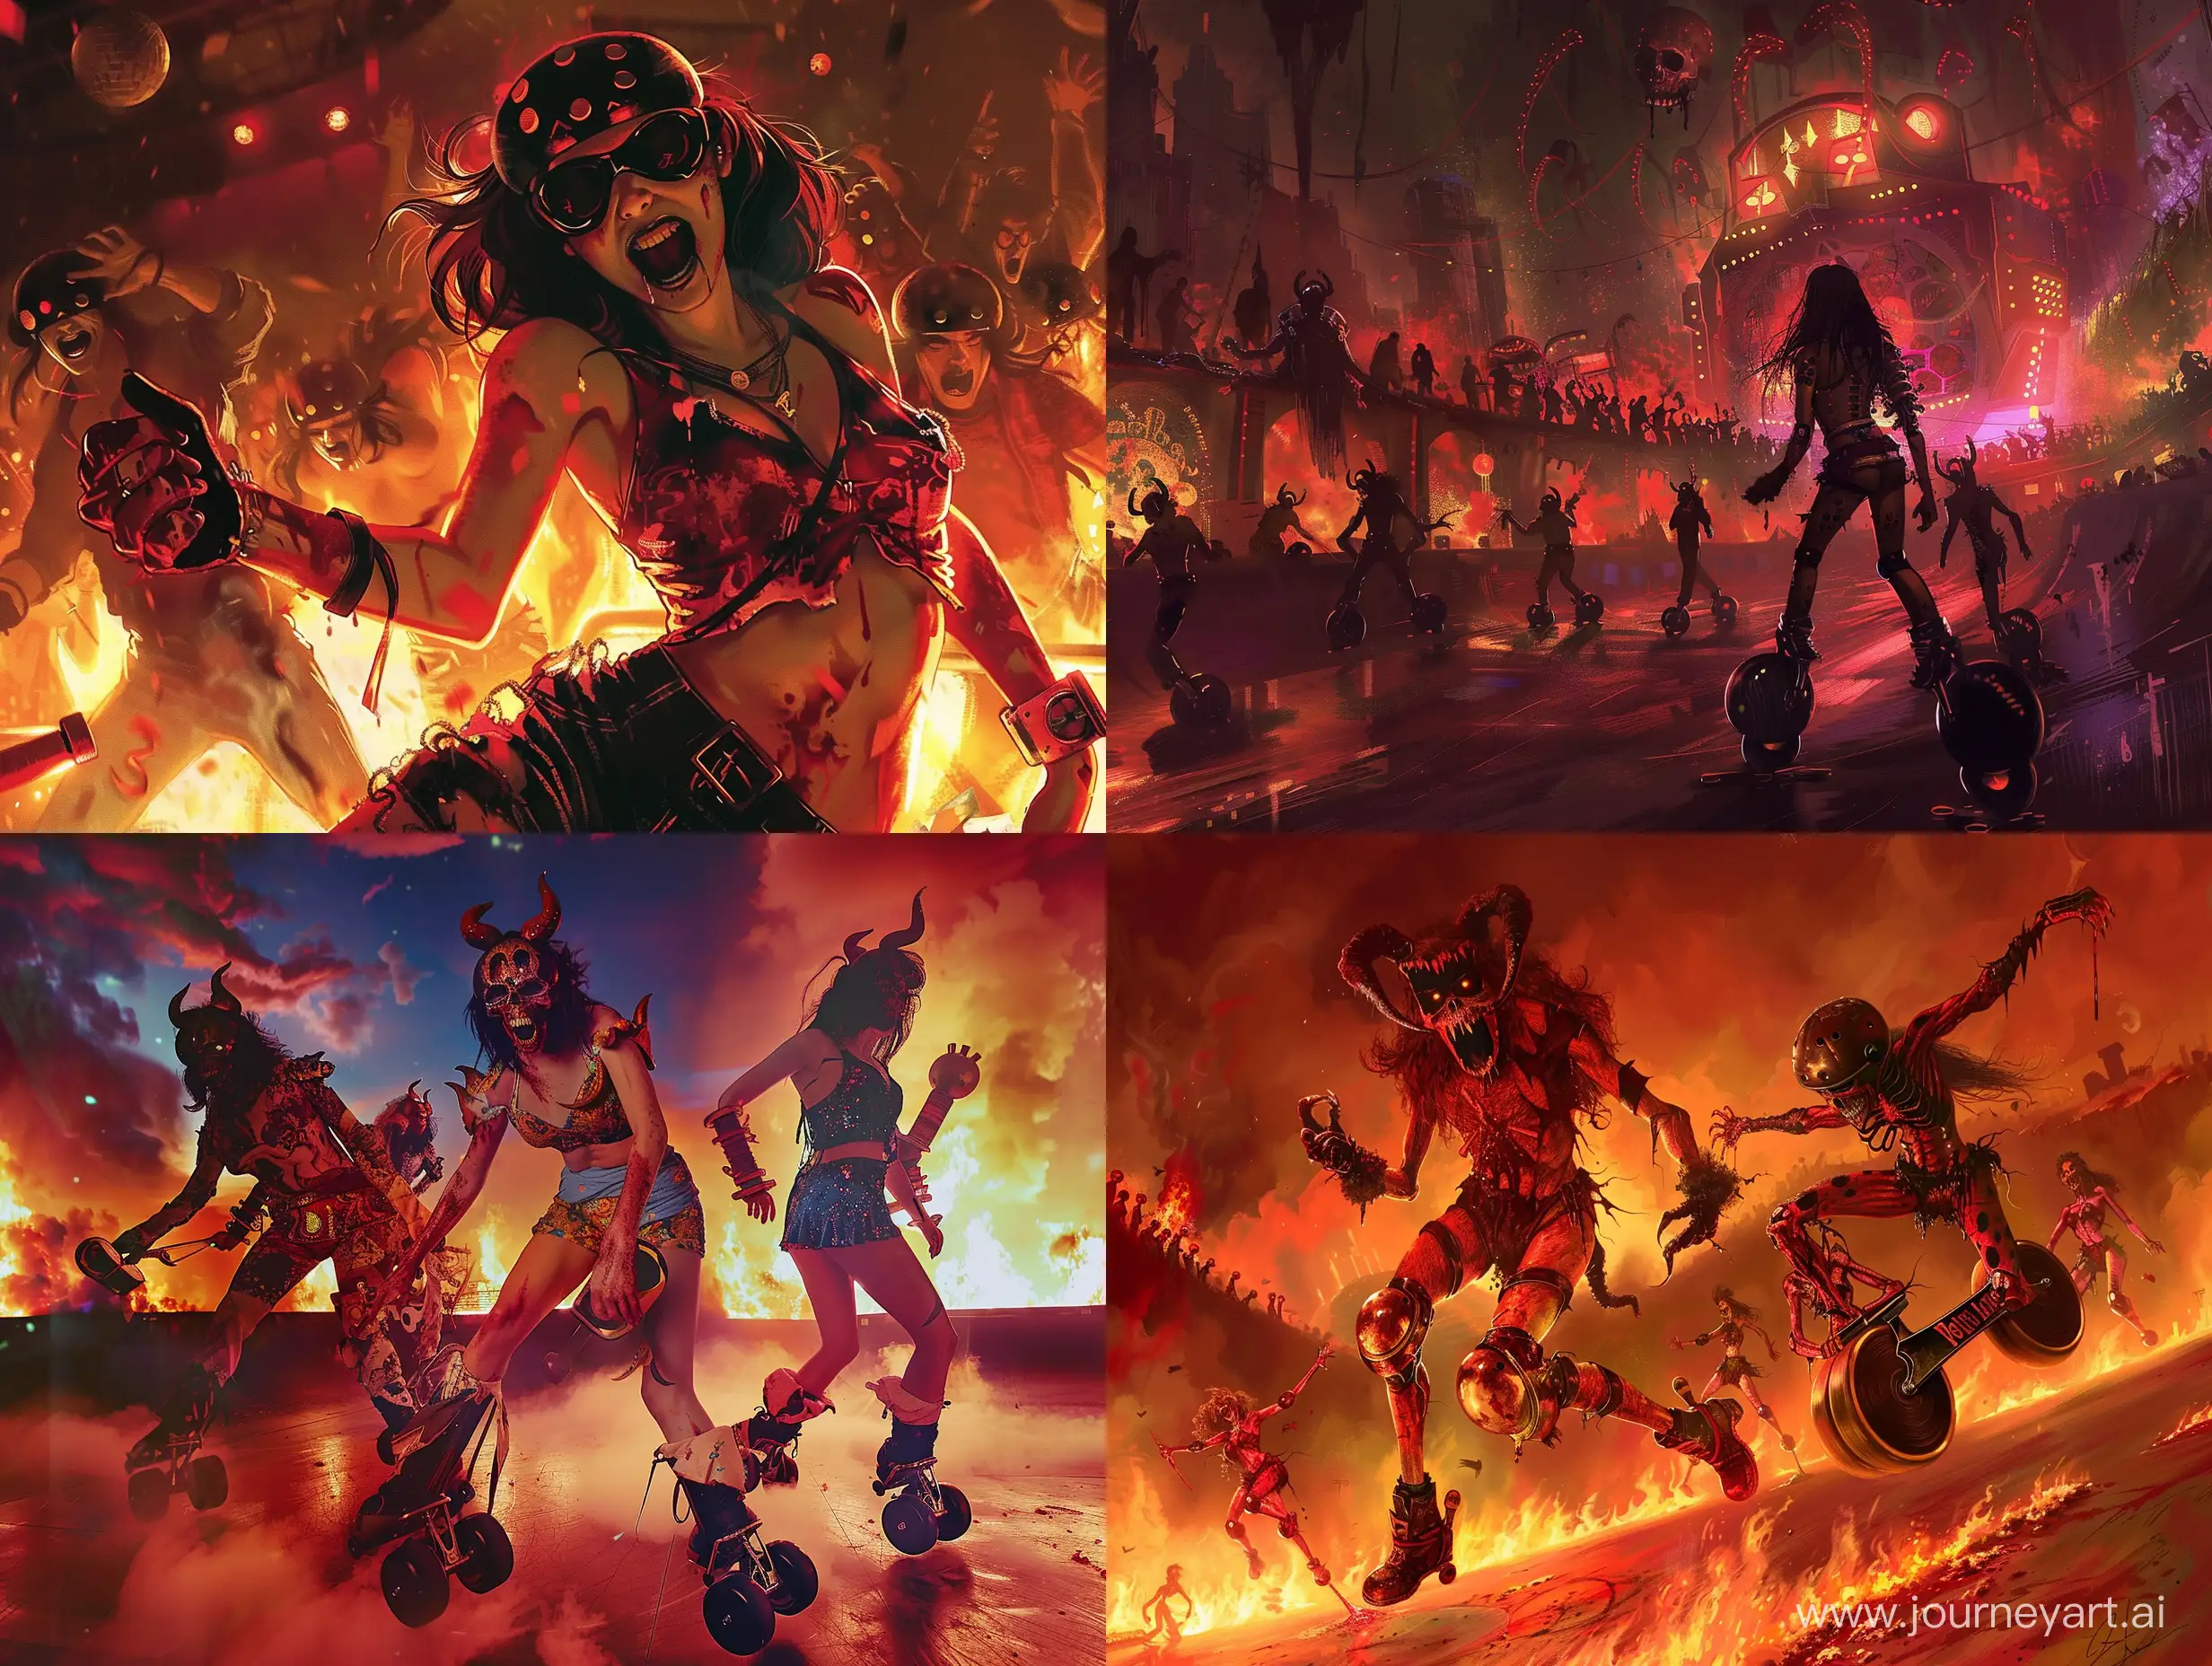 Symbolic-Roller-Disco-Party-in-Hell-Fiery-Revelry-Amidst-Infernal-Ambiance